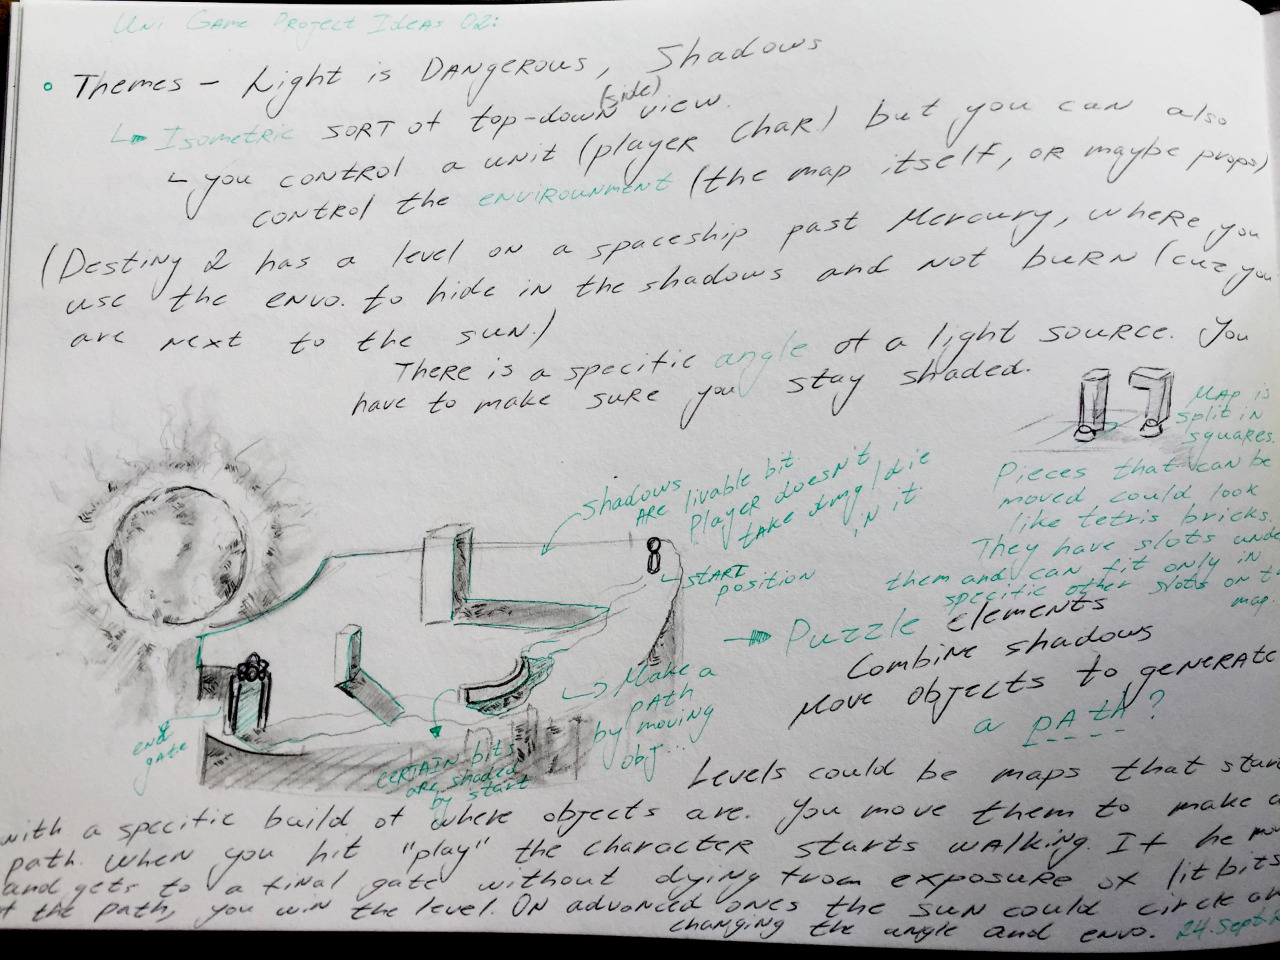 Sketchbook page picture. A drawing of a piece of land with pieces that cast shadows. Giant sun next to it. There is also a lot of text that I use and transcribe better in the paragraphs below.